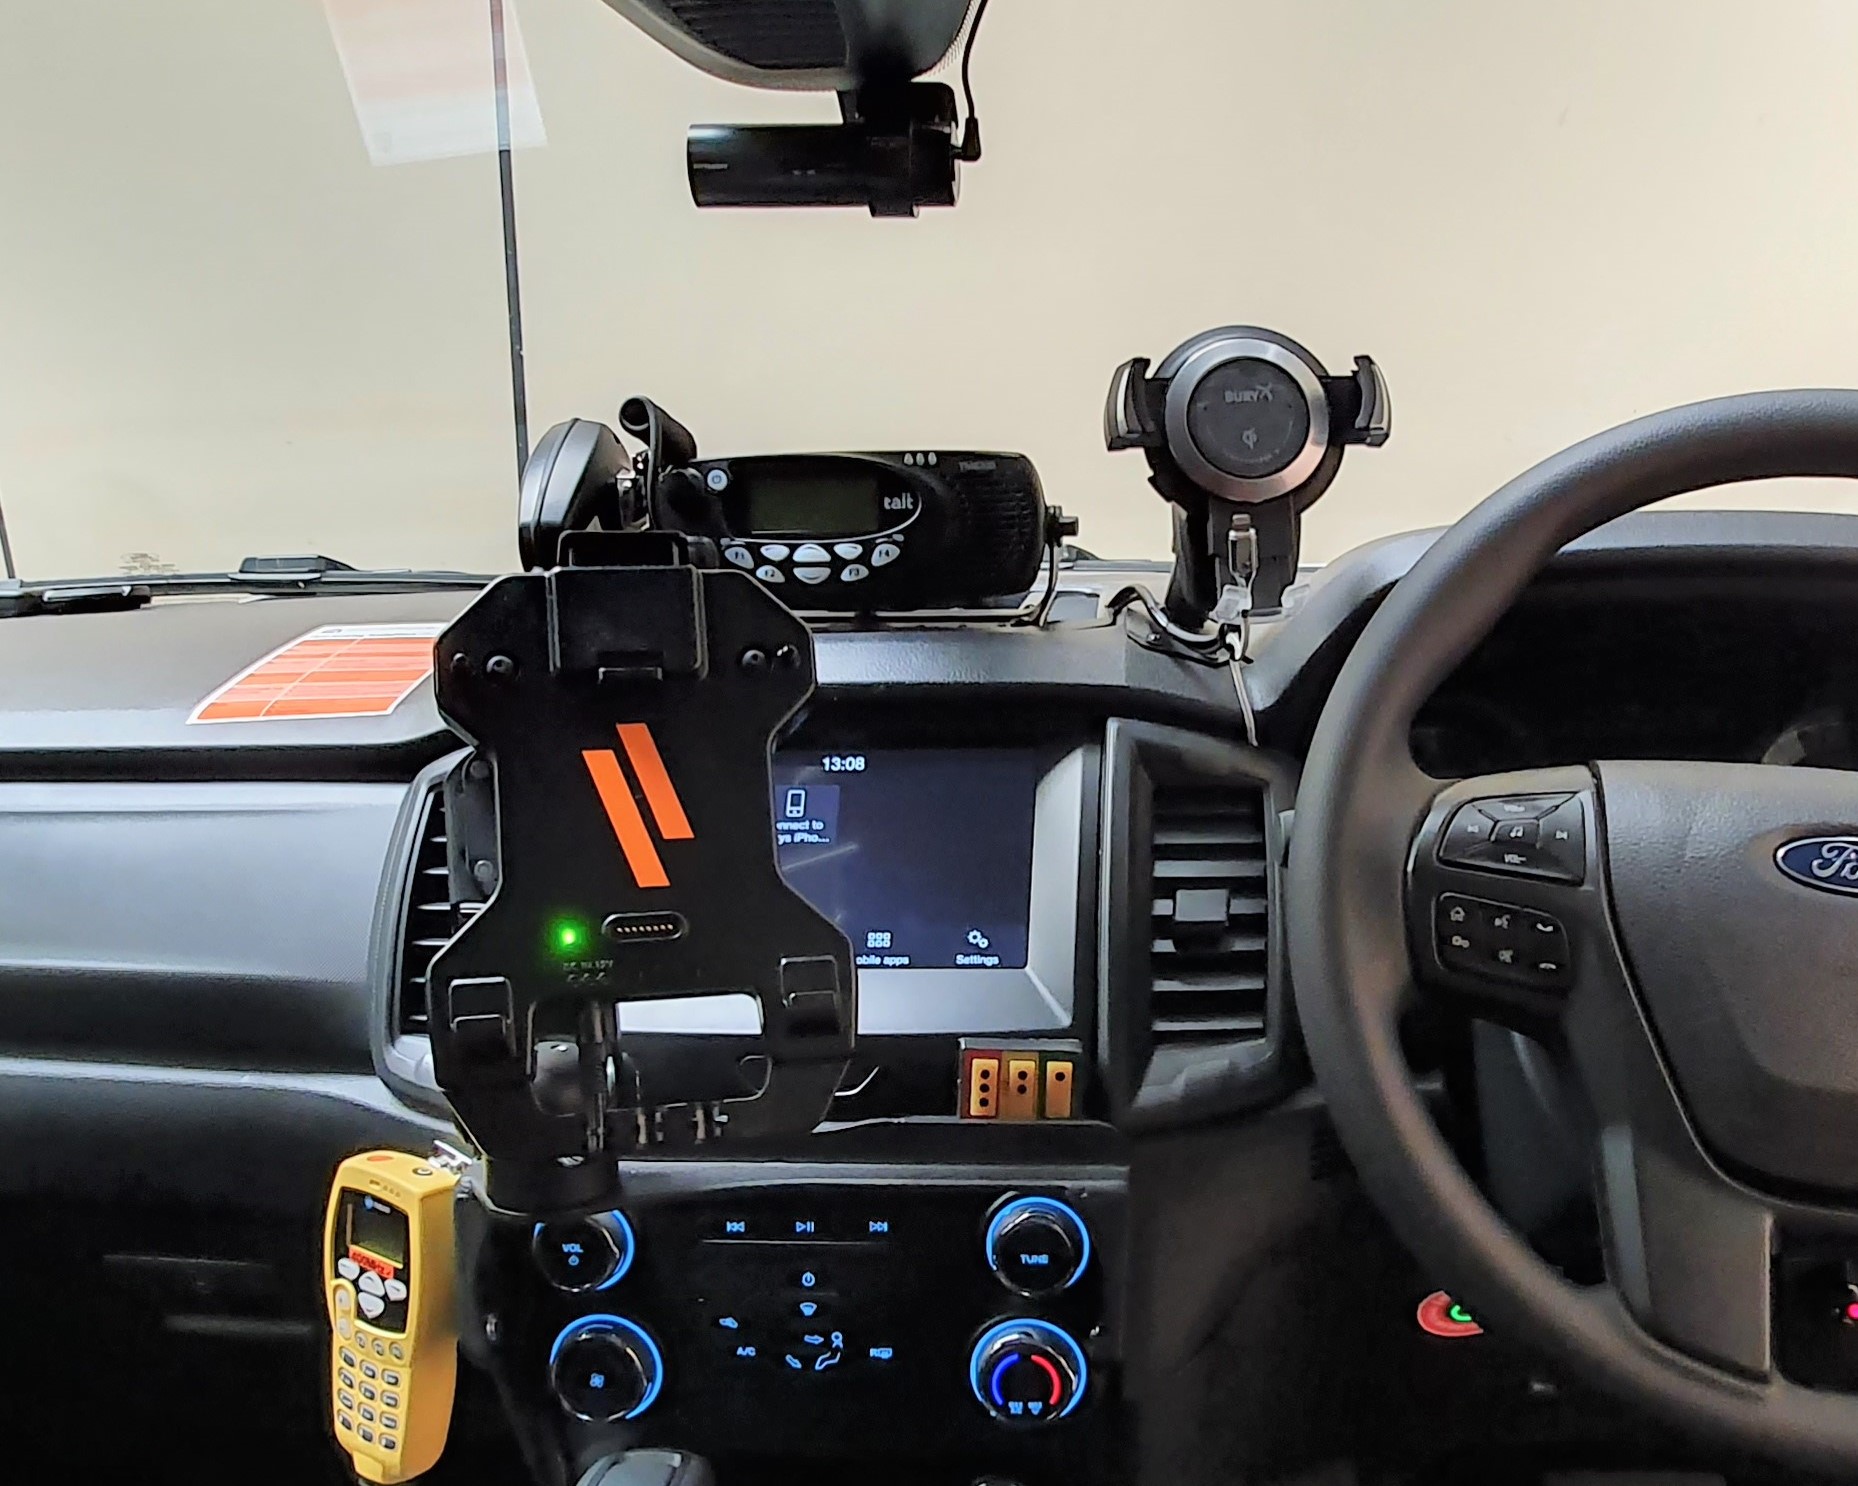 Havis Vehicle Dock installed into Ford Ranger with Dash Mounting Kit